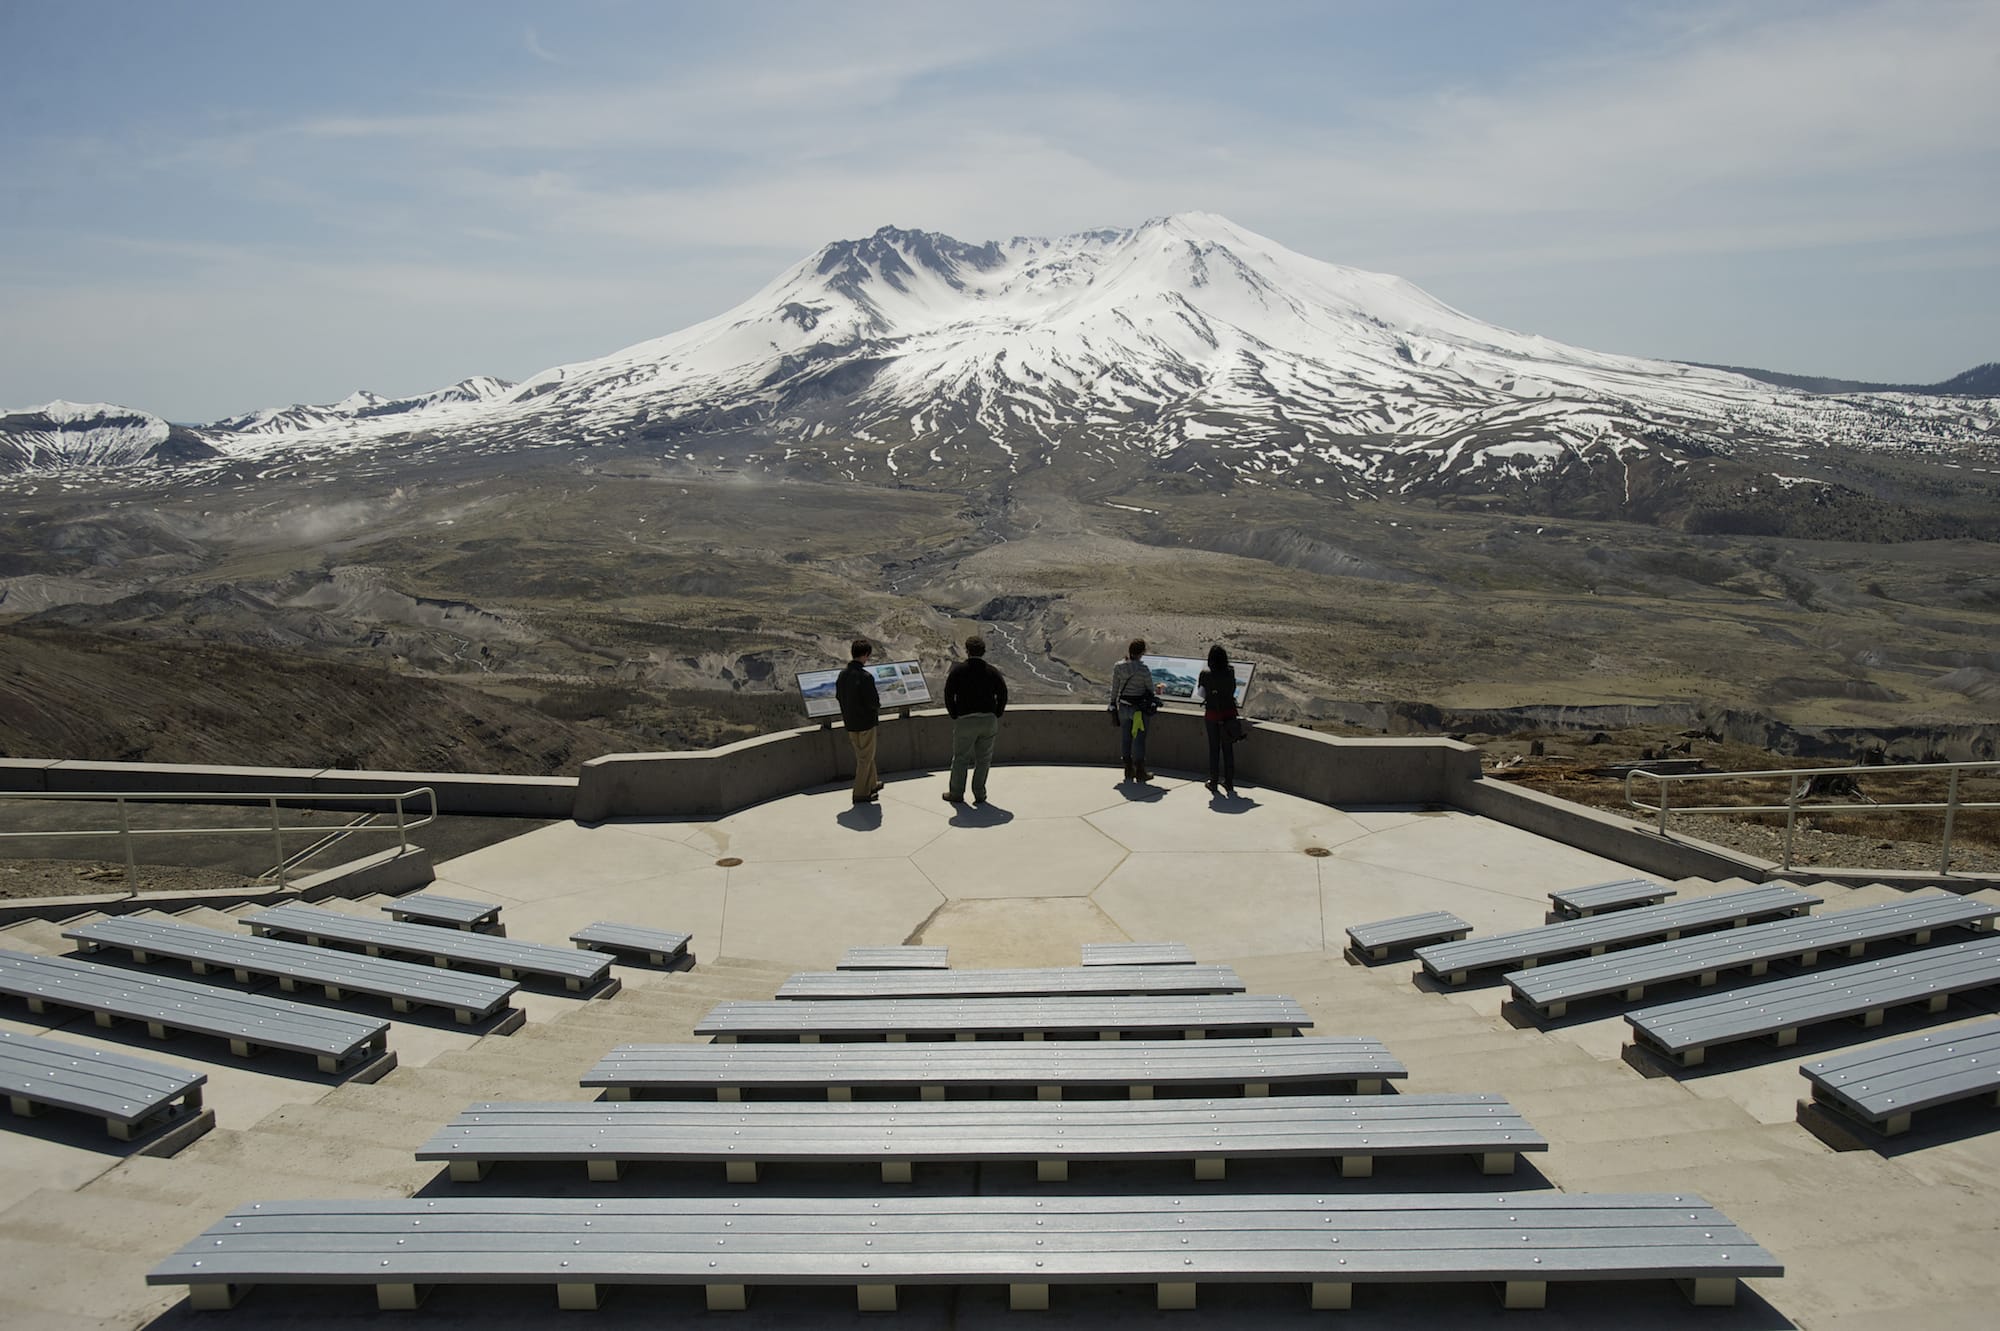 Steven Lane/The Columbian
Visitors to Johnston Ridge Observatory near Mount St. Helens will be greeted by a new outdoor amphitheater finished late last year. Johnston Ridge and other facilities near the mountain are free today, the anniversary of the mountain's 1980 eruption.